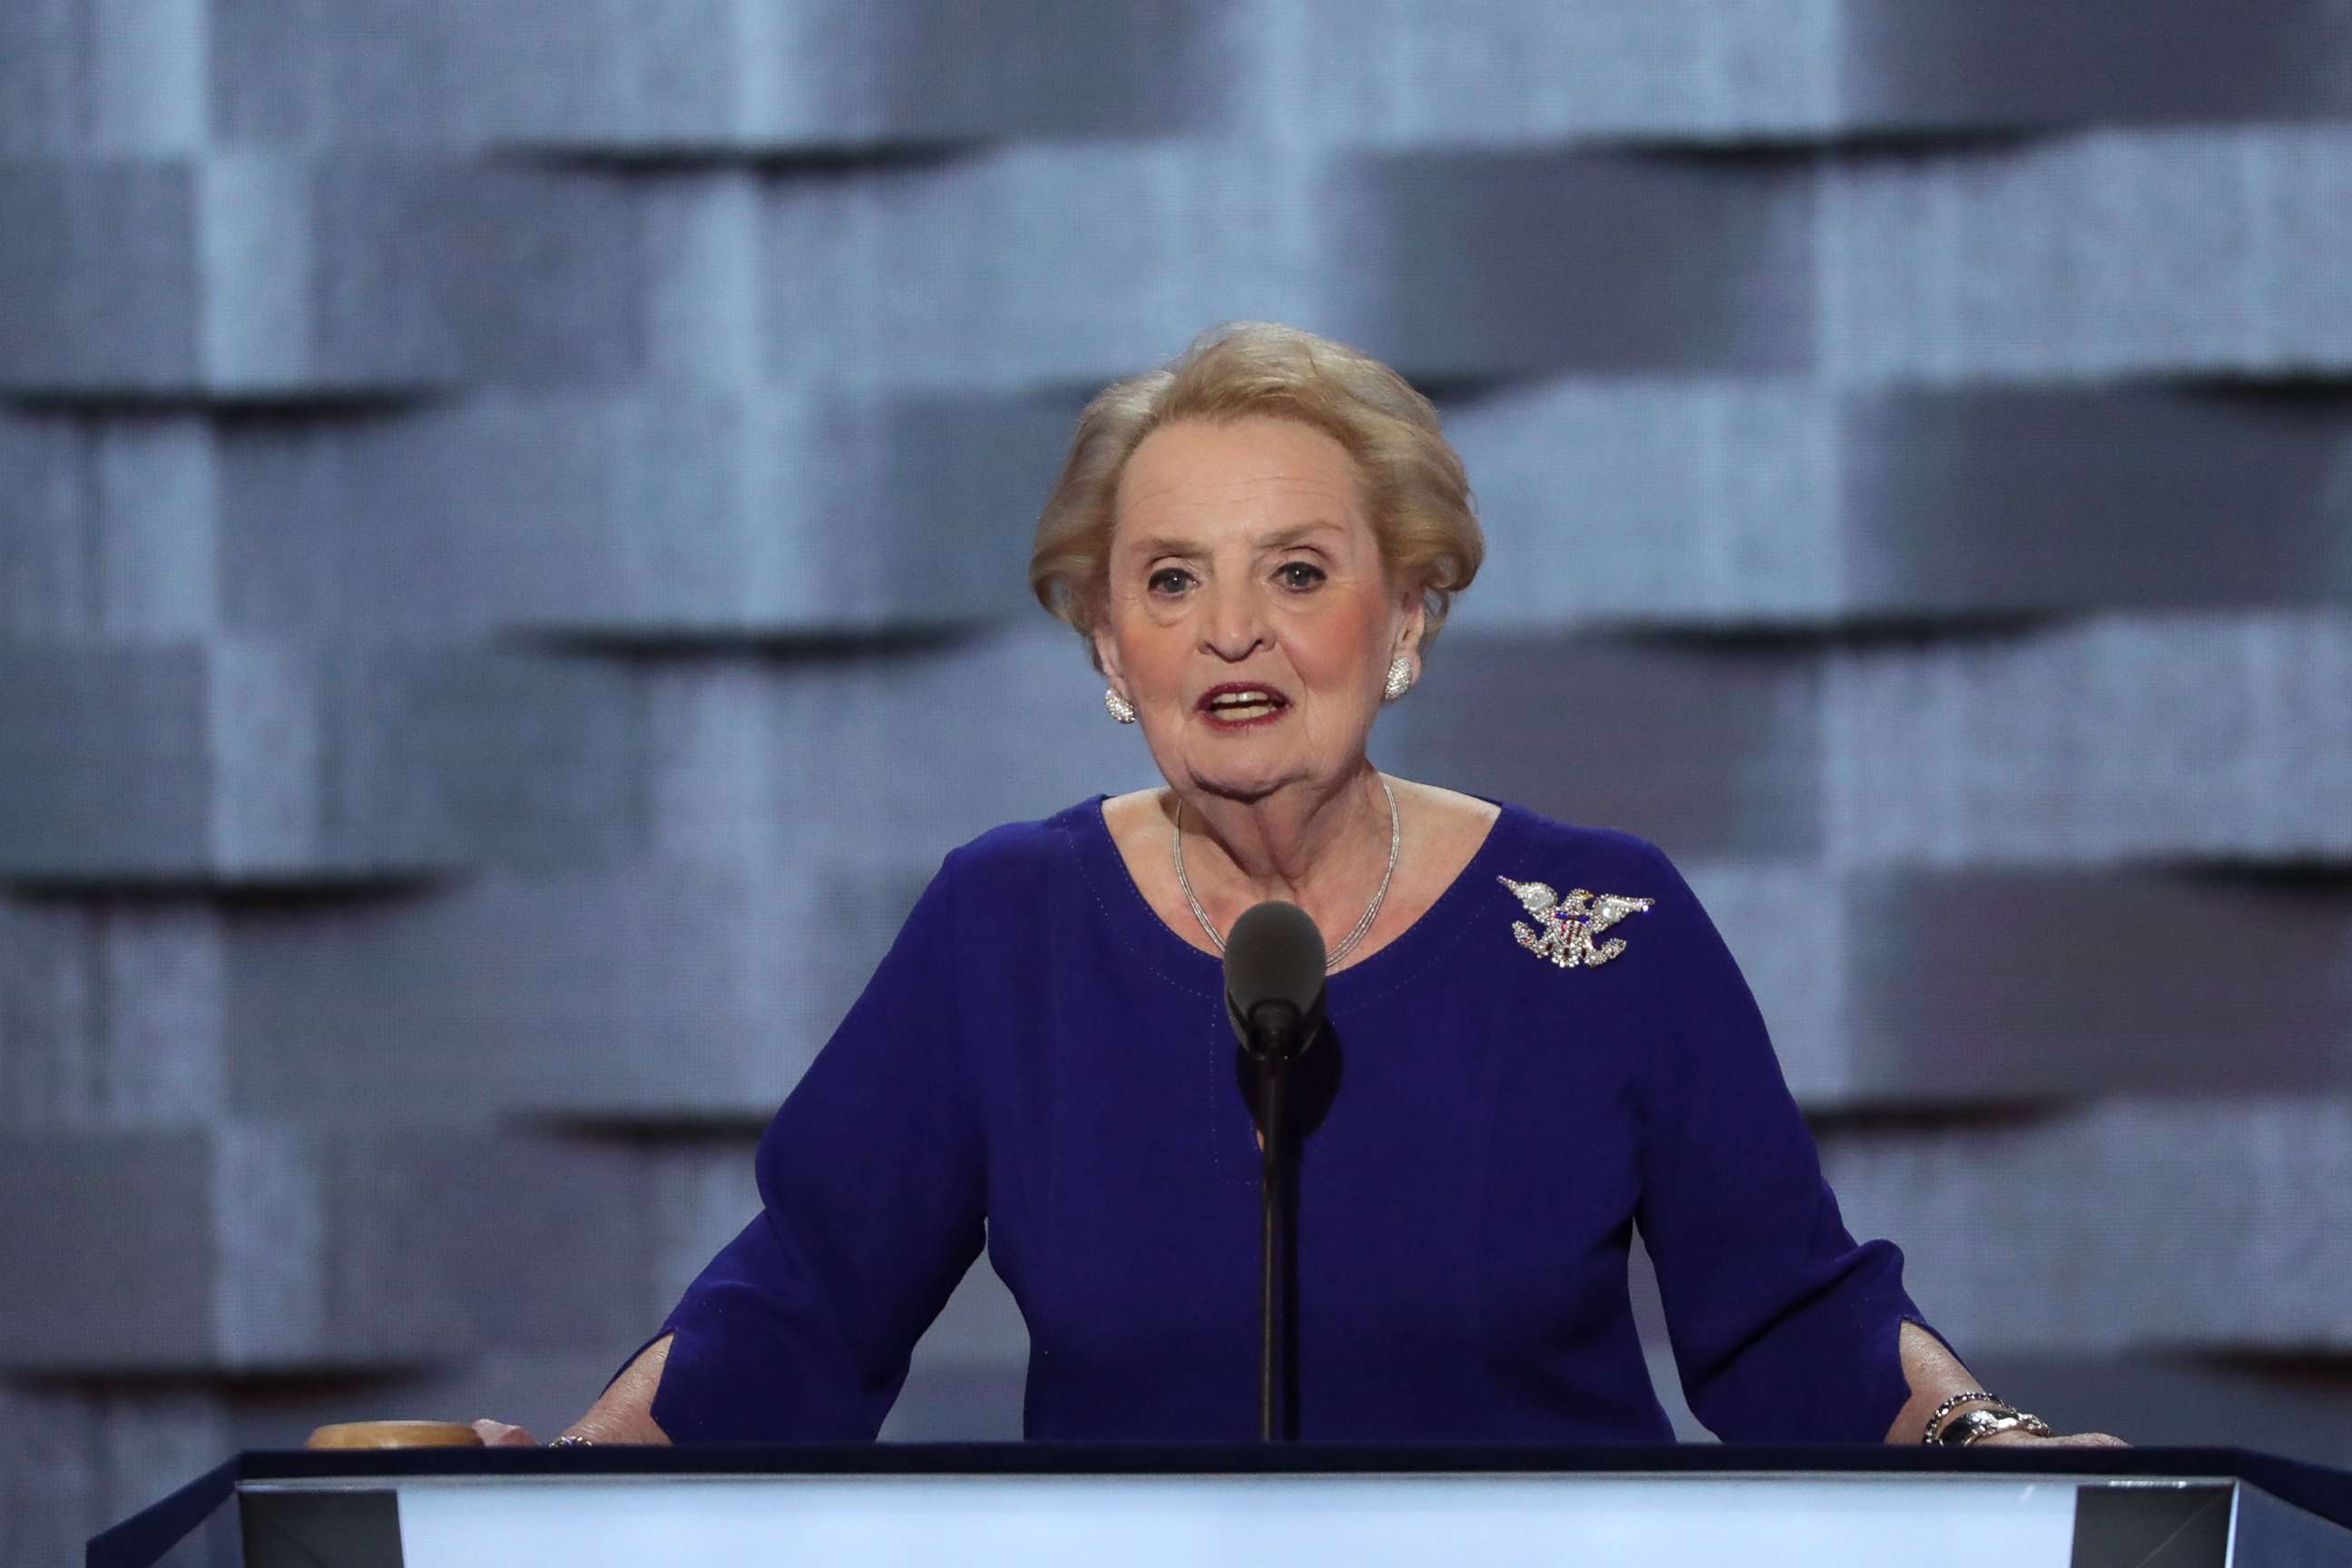 PHOTO: In this July 26, 2016, file photo, former secretary of state Madeleine Albright delivers remarks on the second day of the Democratic National Convention at the Wells Fargo Center, in Philadelphia.